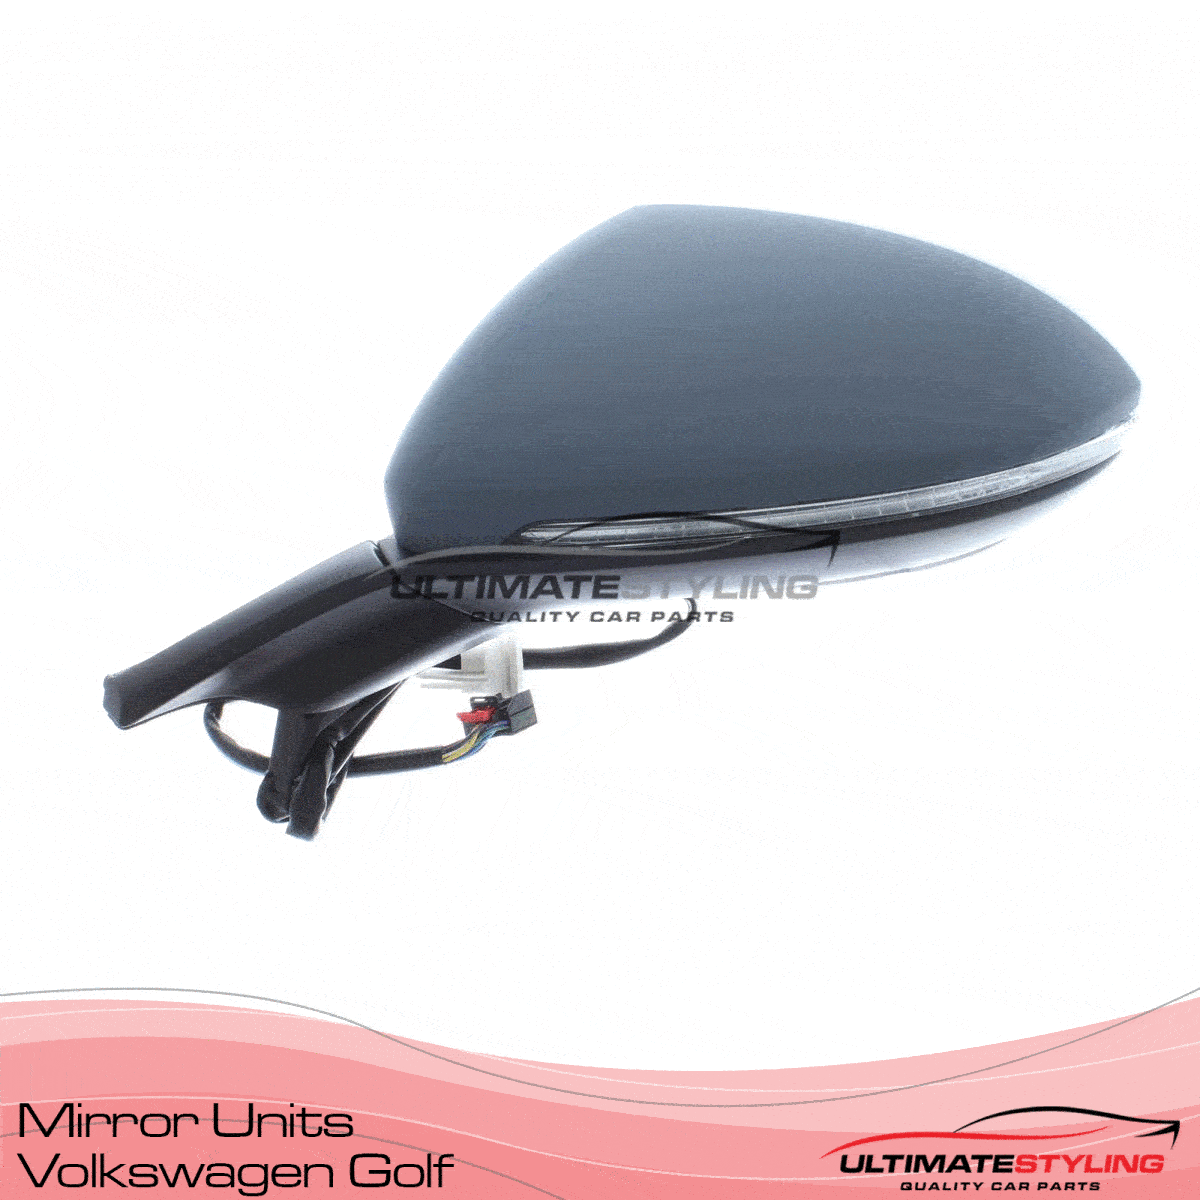 360 degree view of VW Golf wing mirror